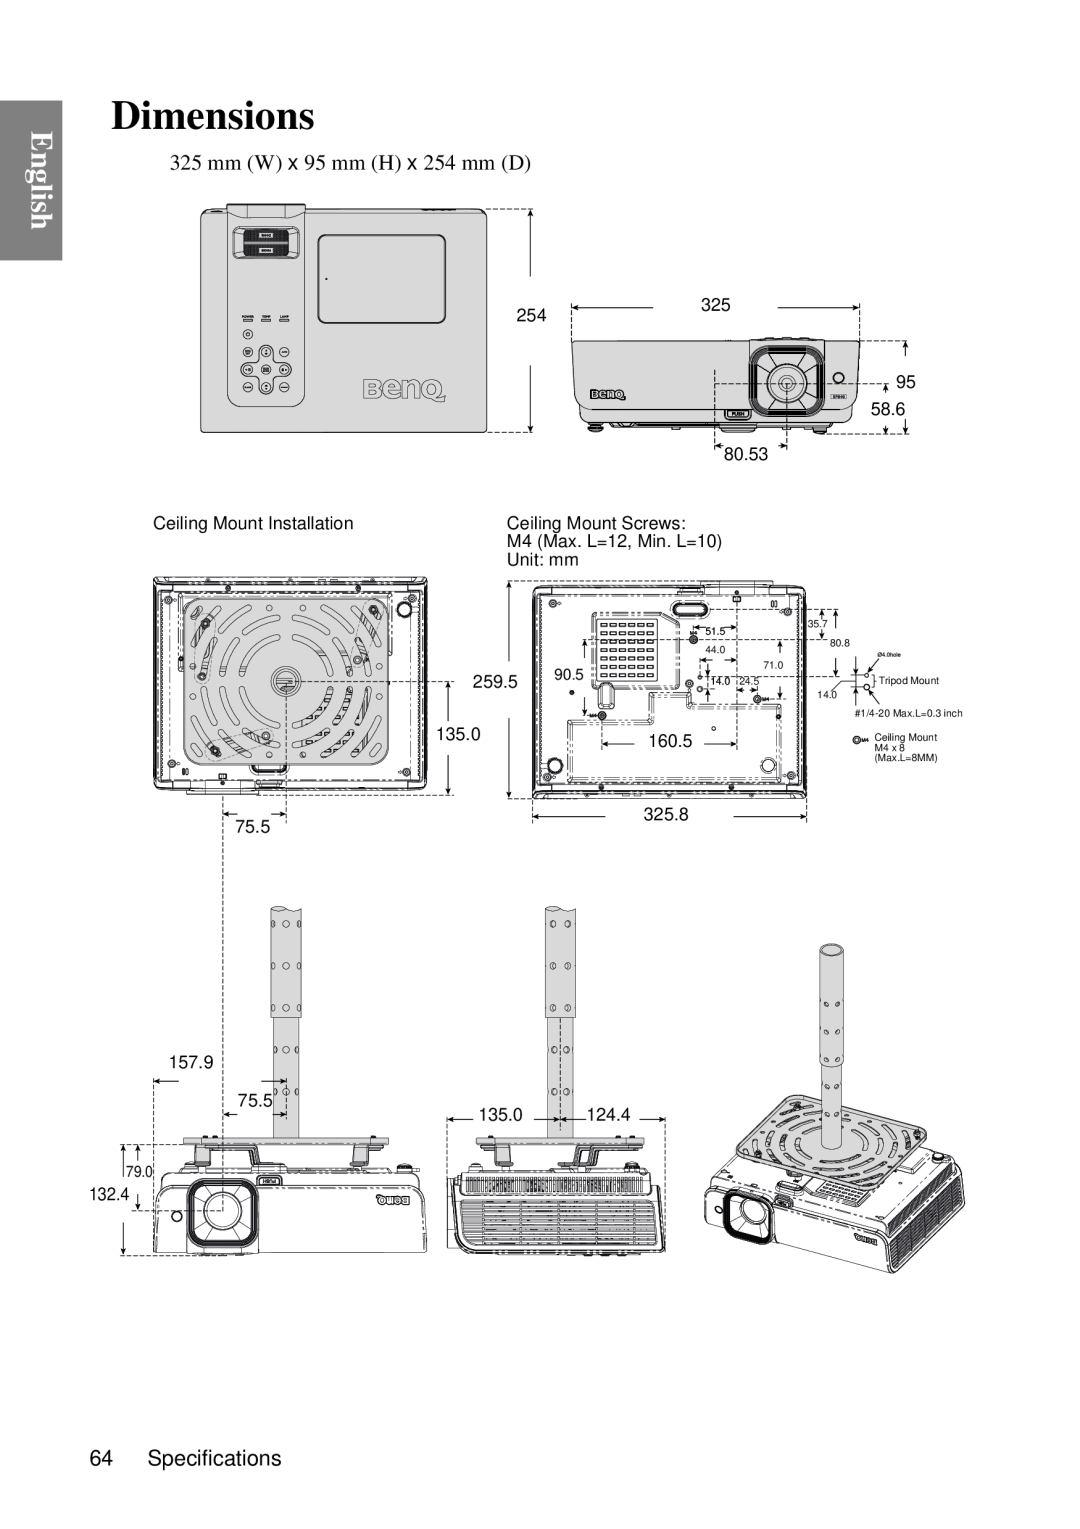 BenQ SP840 Dimensions, English, 132.4, Ceiling Mount Installation, 254325, 259.5 135.0, 160.5, 75.5 157.9, 325.8 135.0 